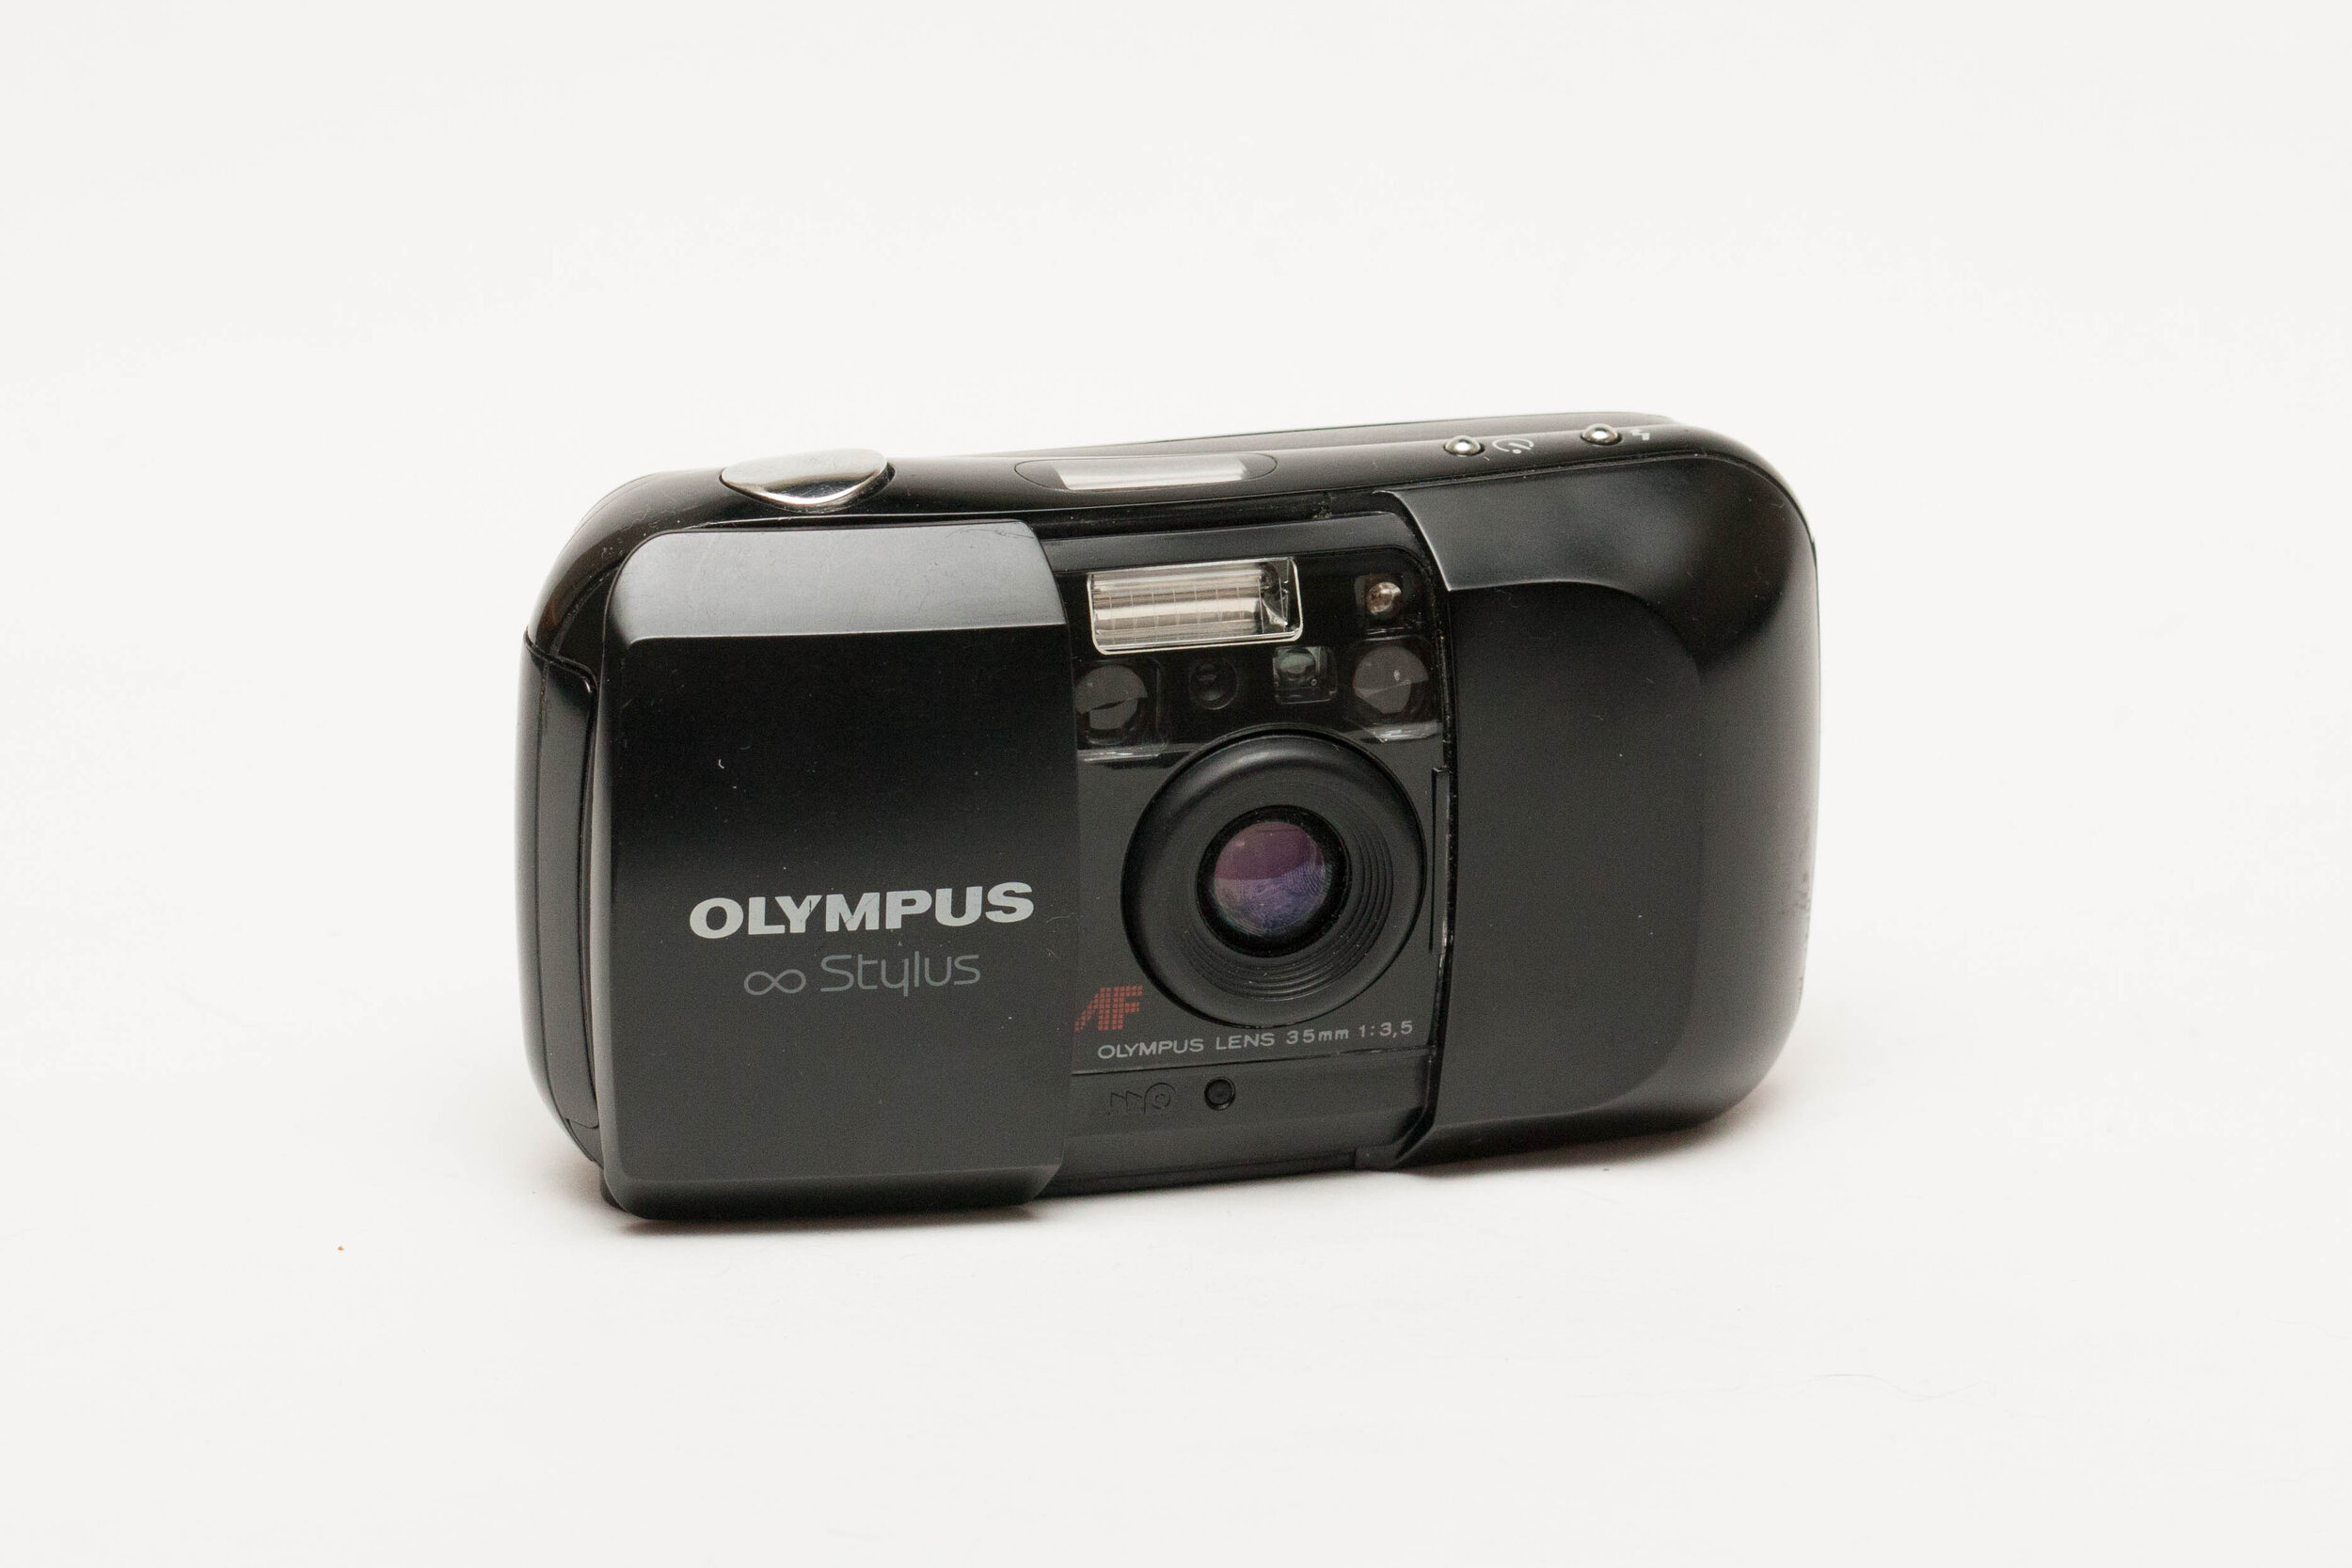 Cheap Cameras for Beginners - Olympus Stylus